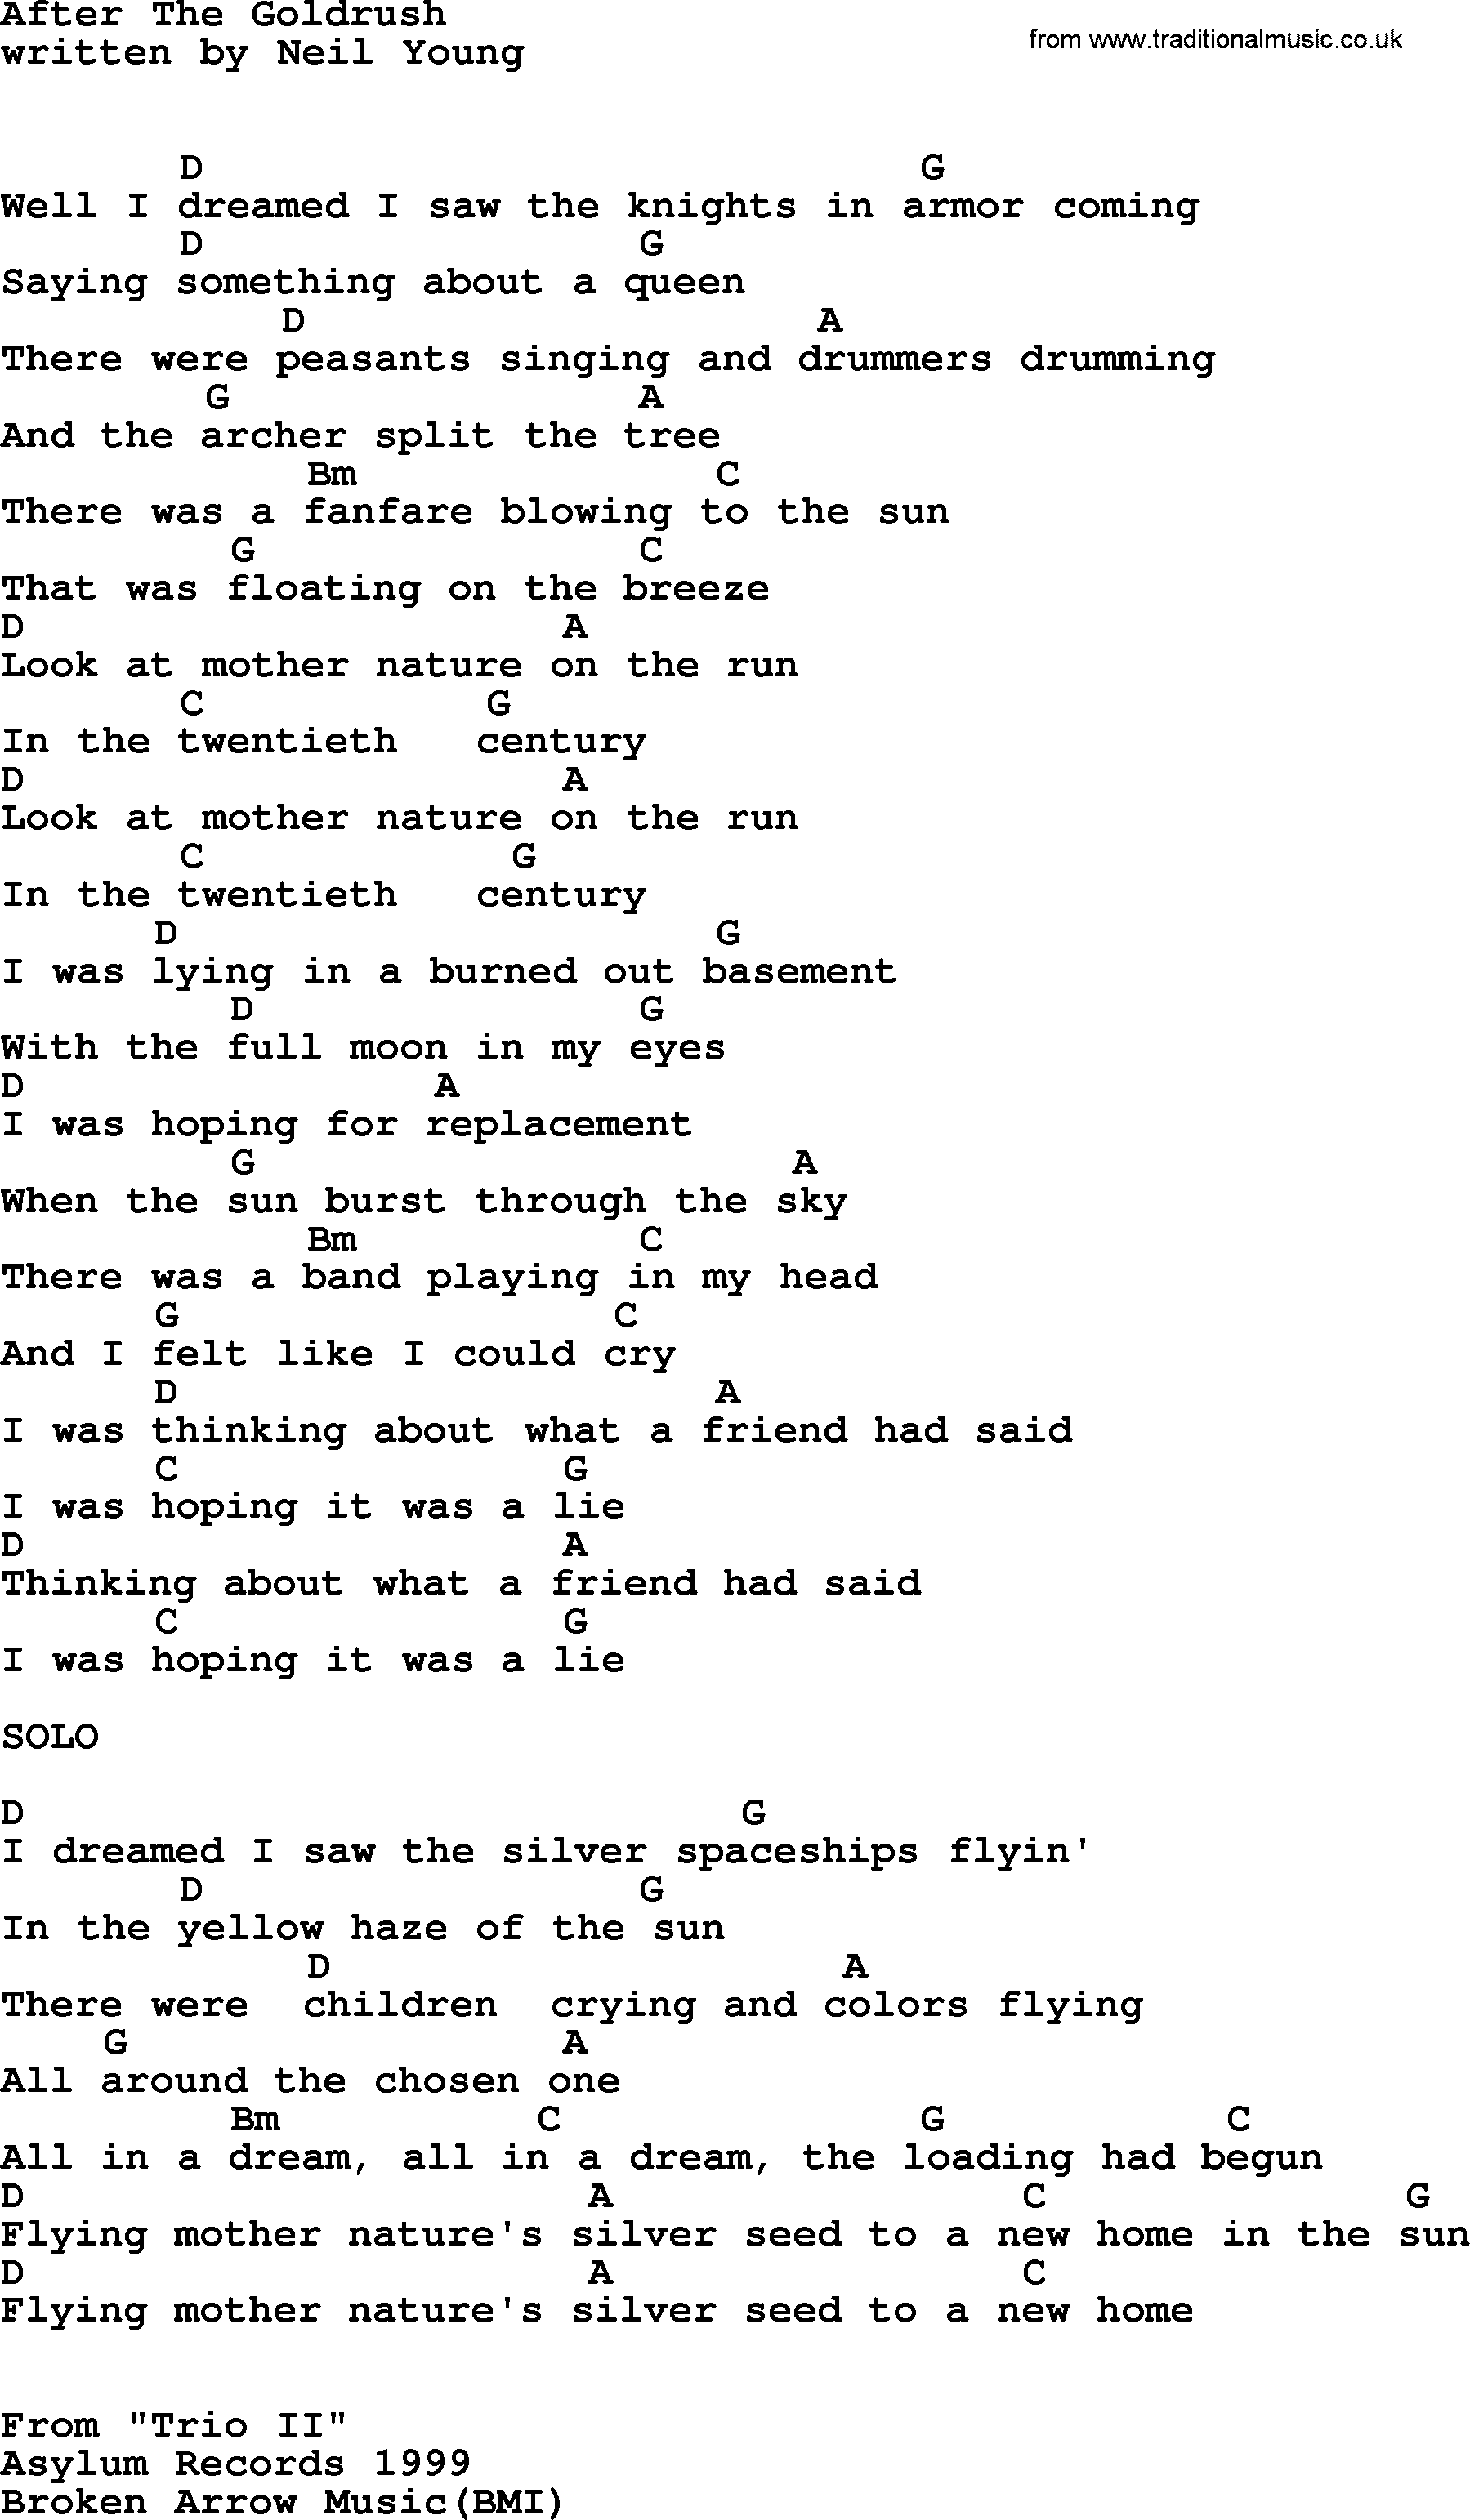 Dolly Parton song After The Goldrush, lyrics and chords